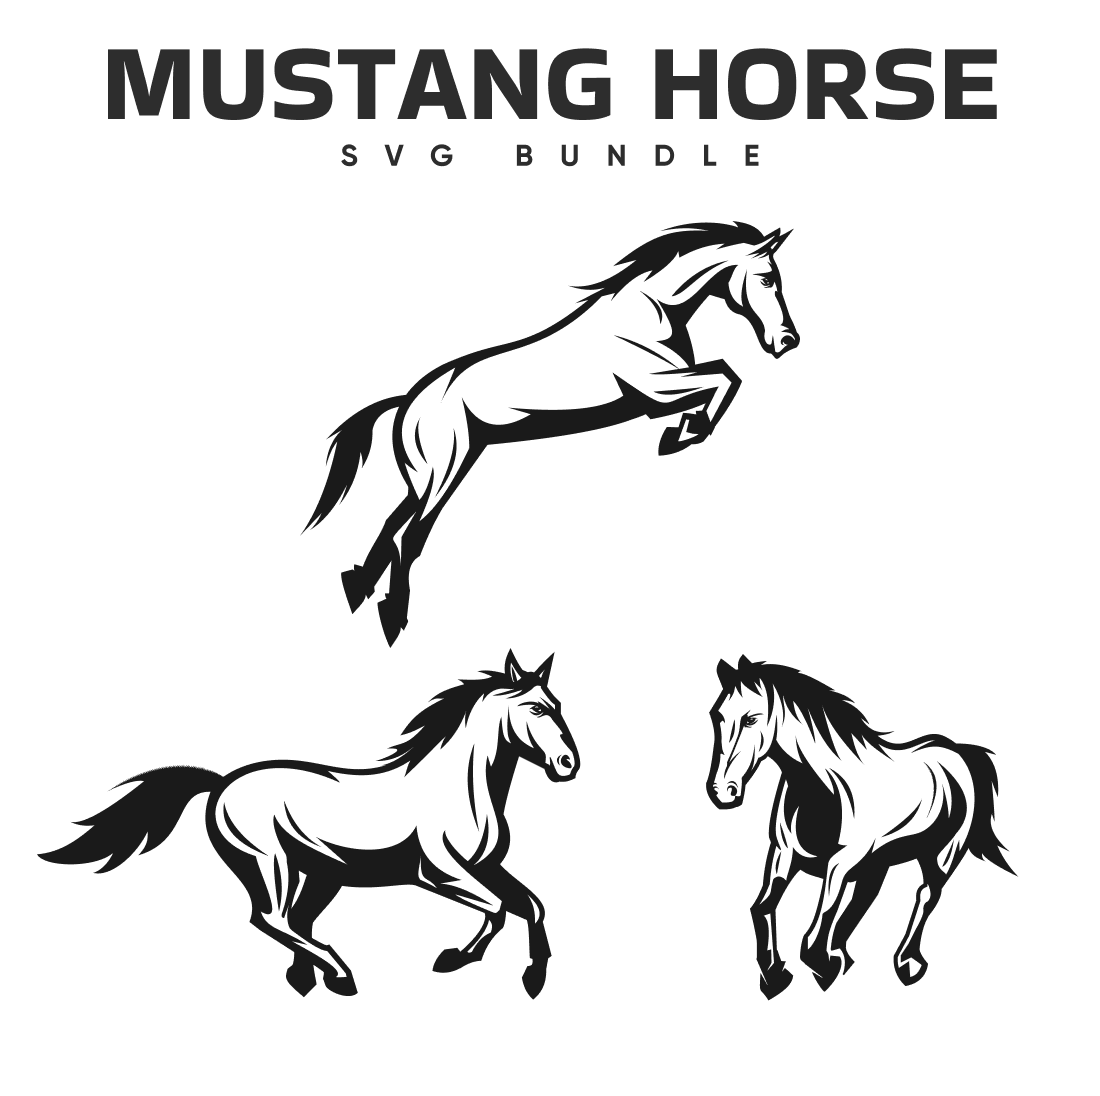 Three horses running in different directions on a white background.